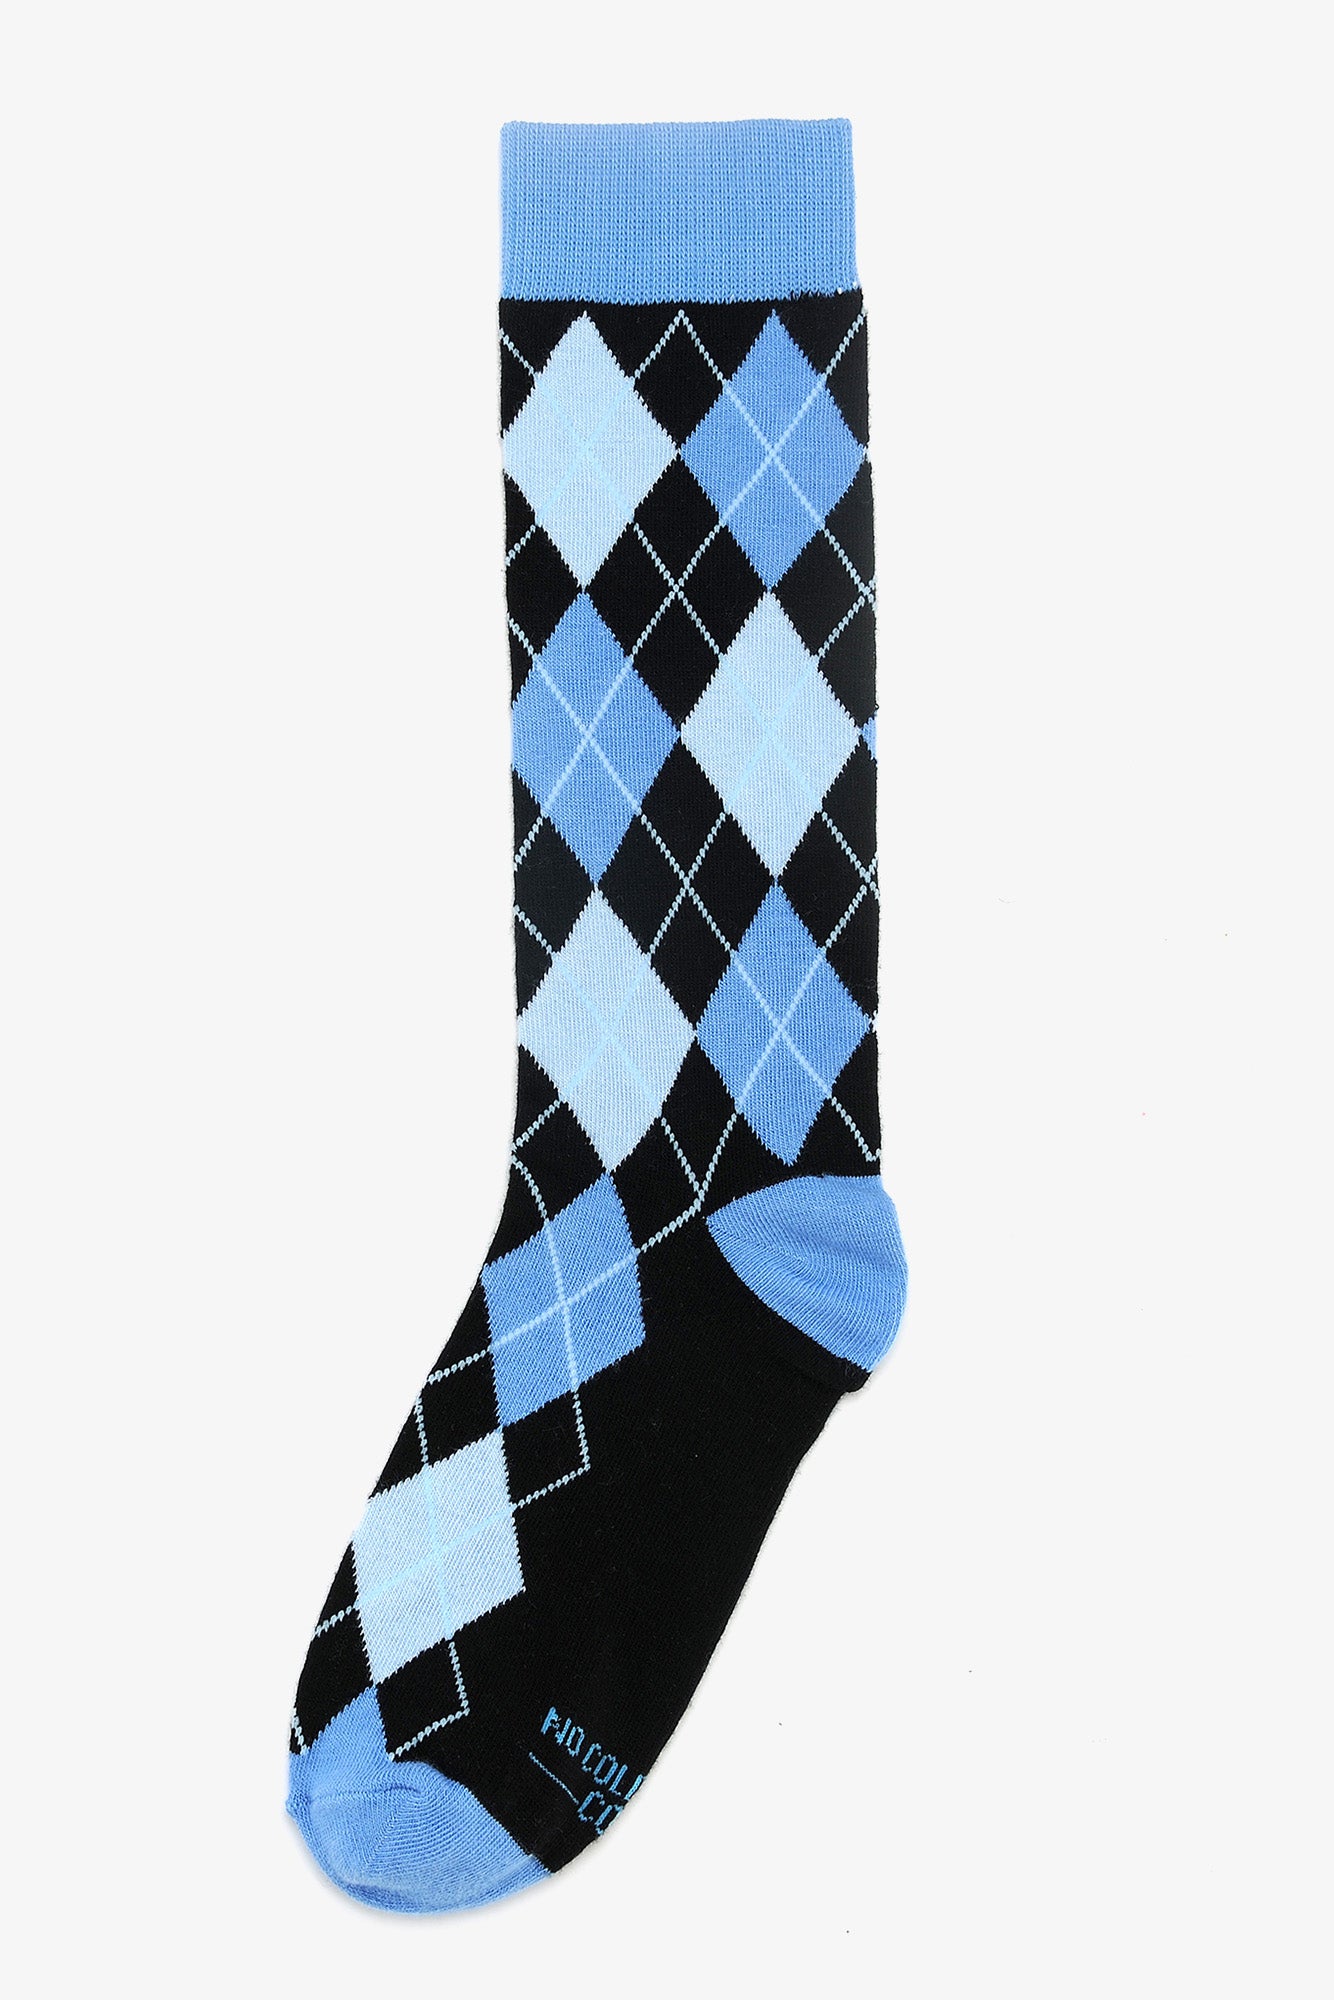 Blue and Black Argyle Groomsmen Socks by No Cold Feet